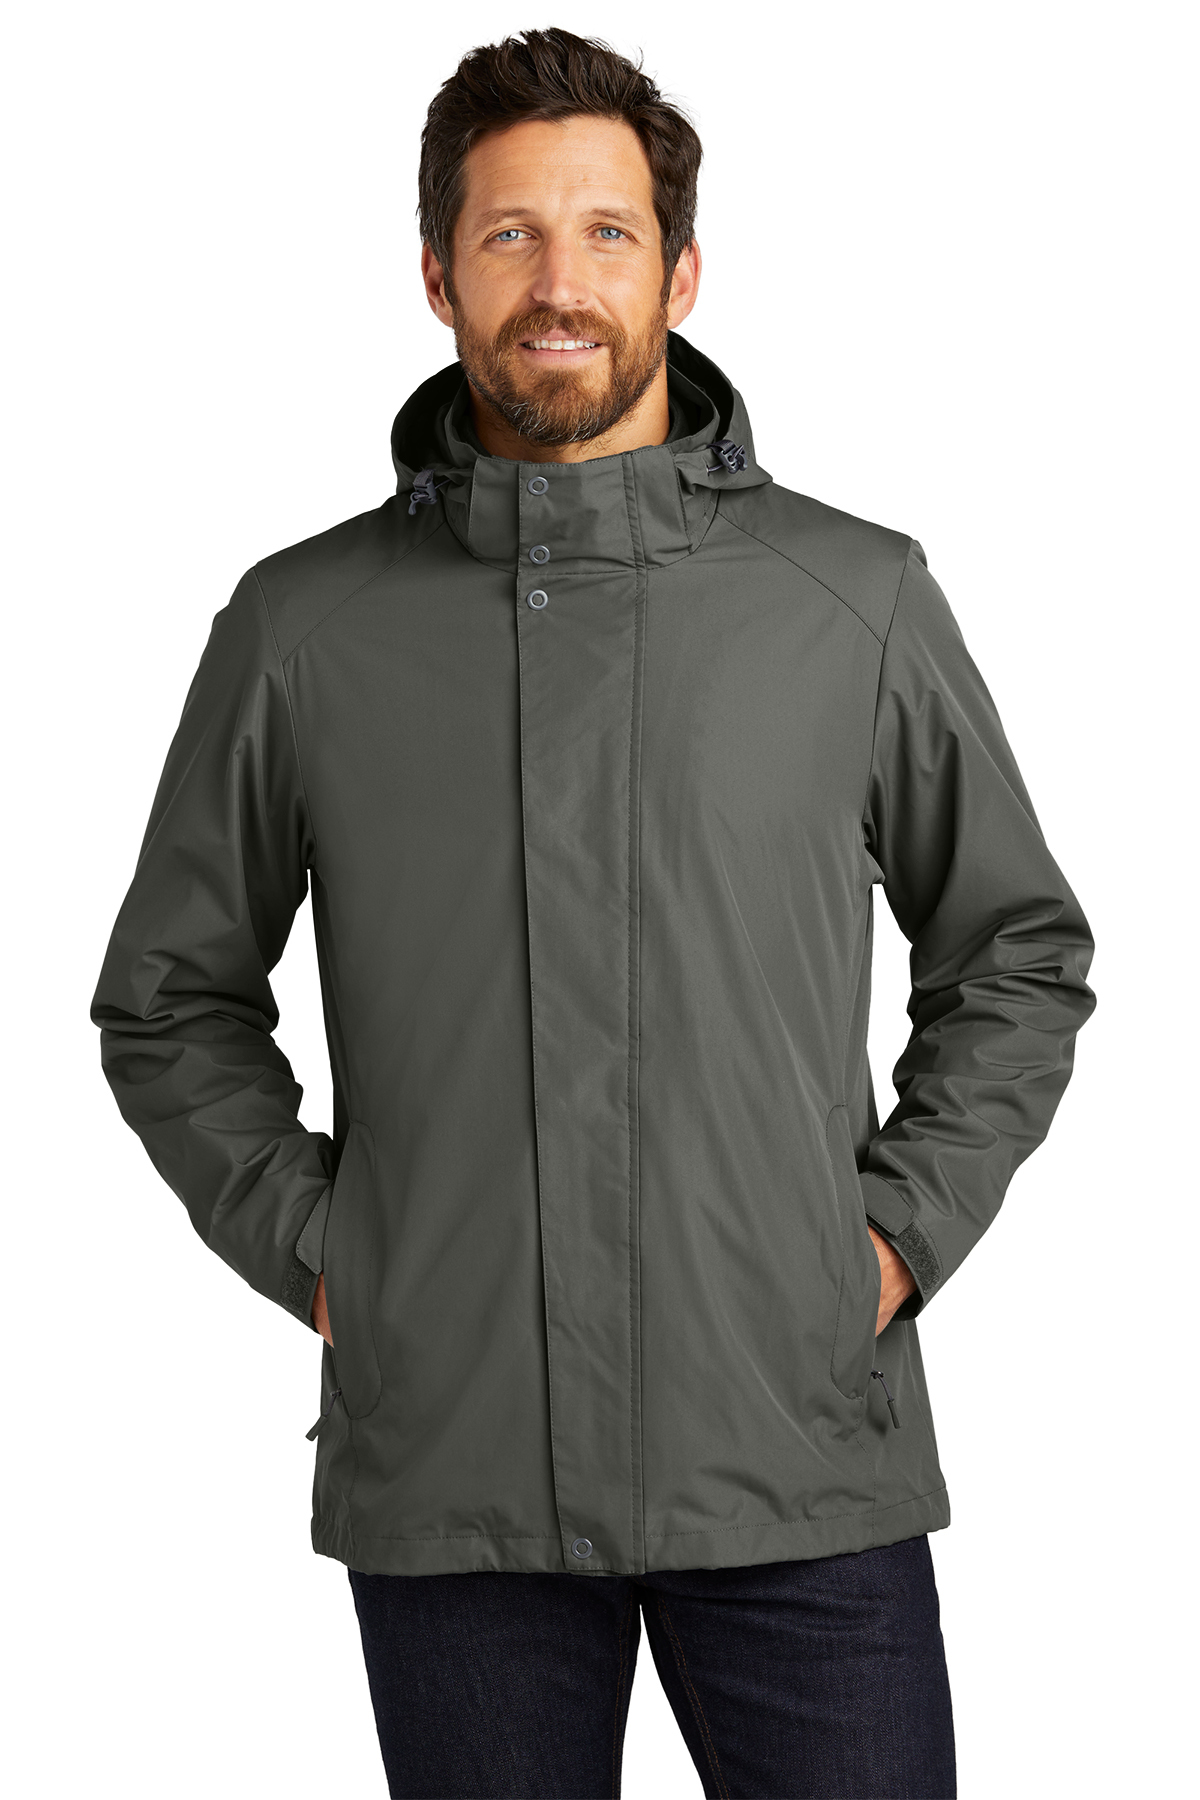 Port Authority All-Weather 3-in-1 Jacket | Product | Company Casuals